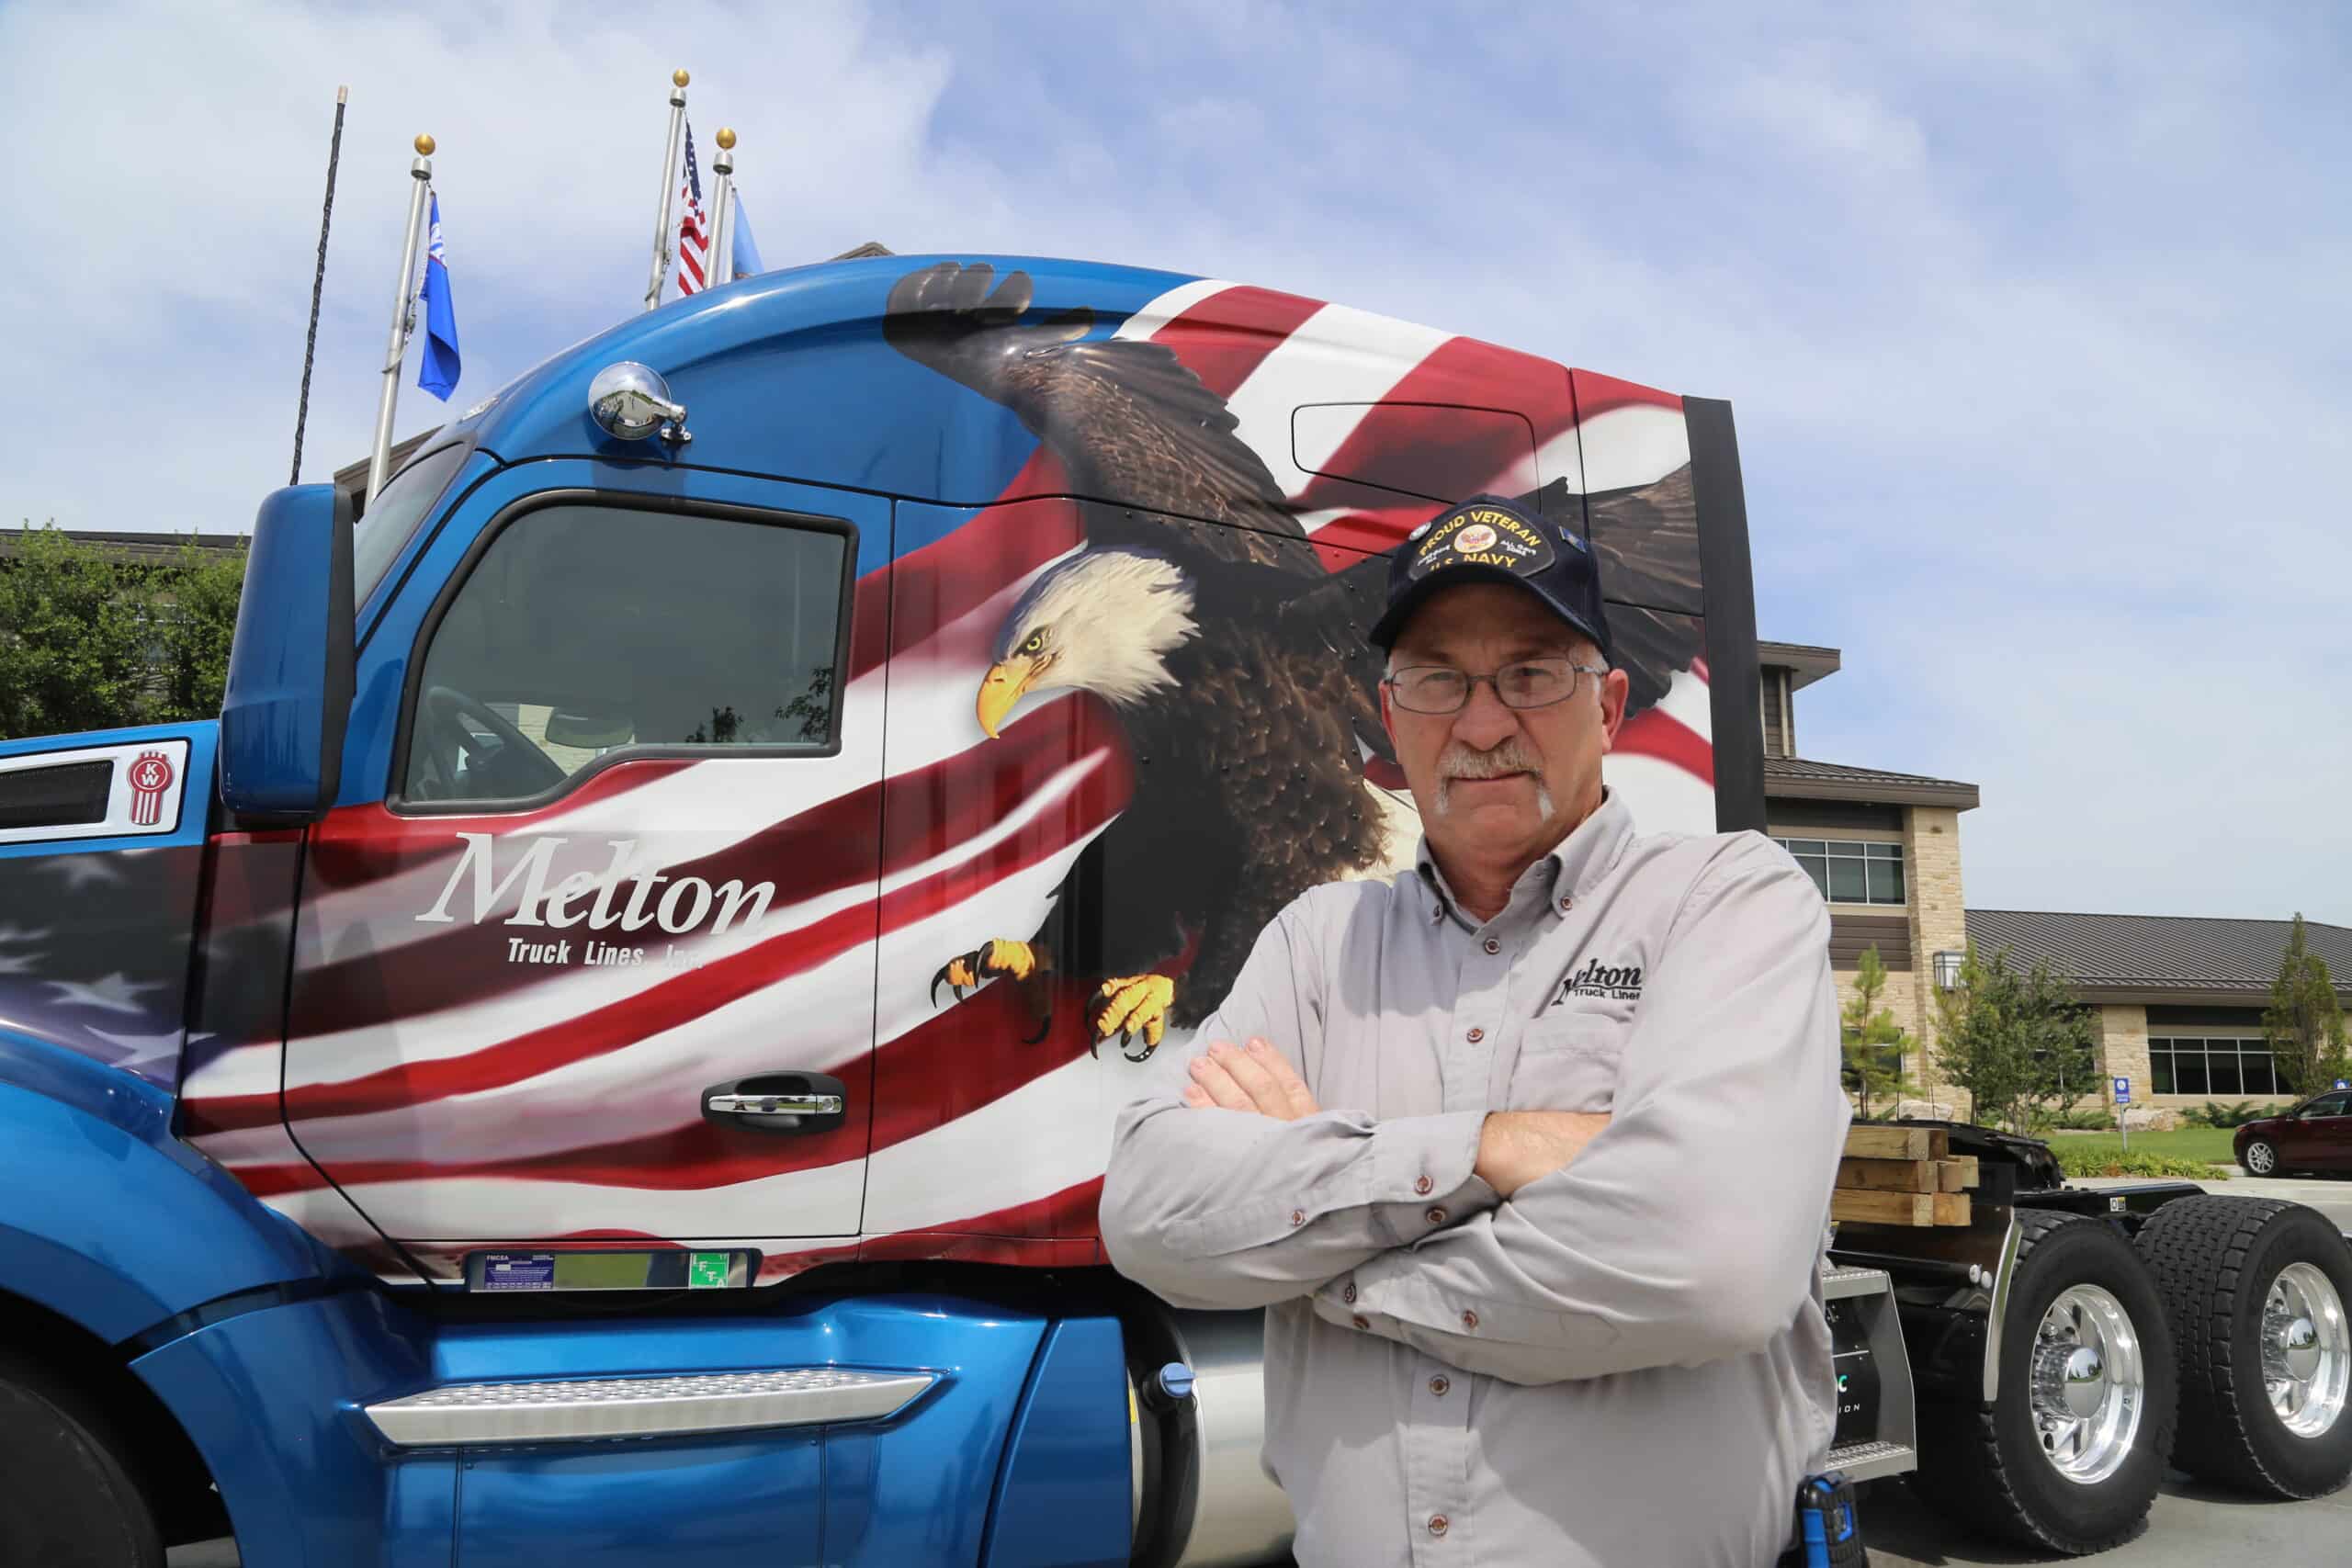 Military veteran flatbed driver standing in front of military wrapped flatbed truck